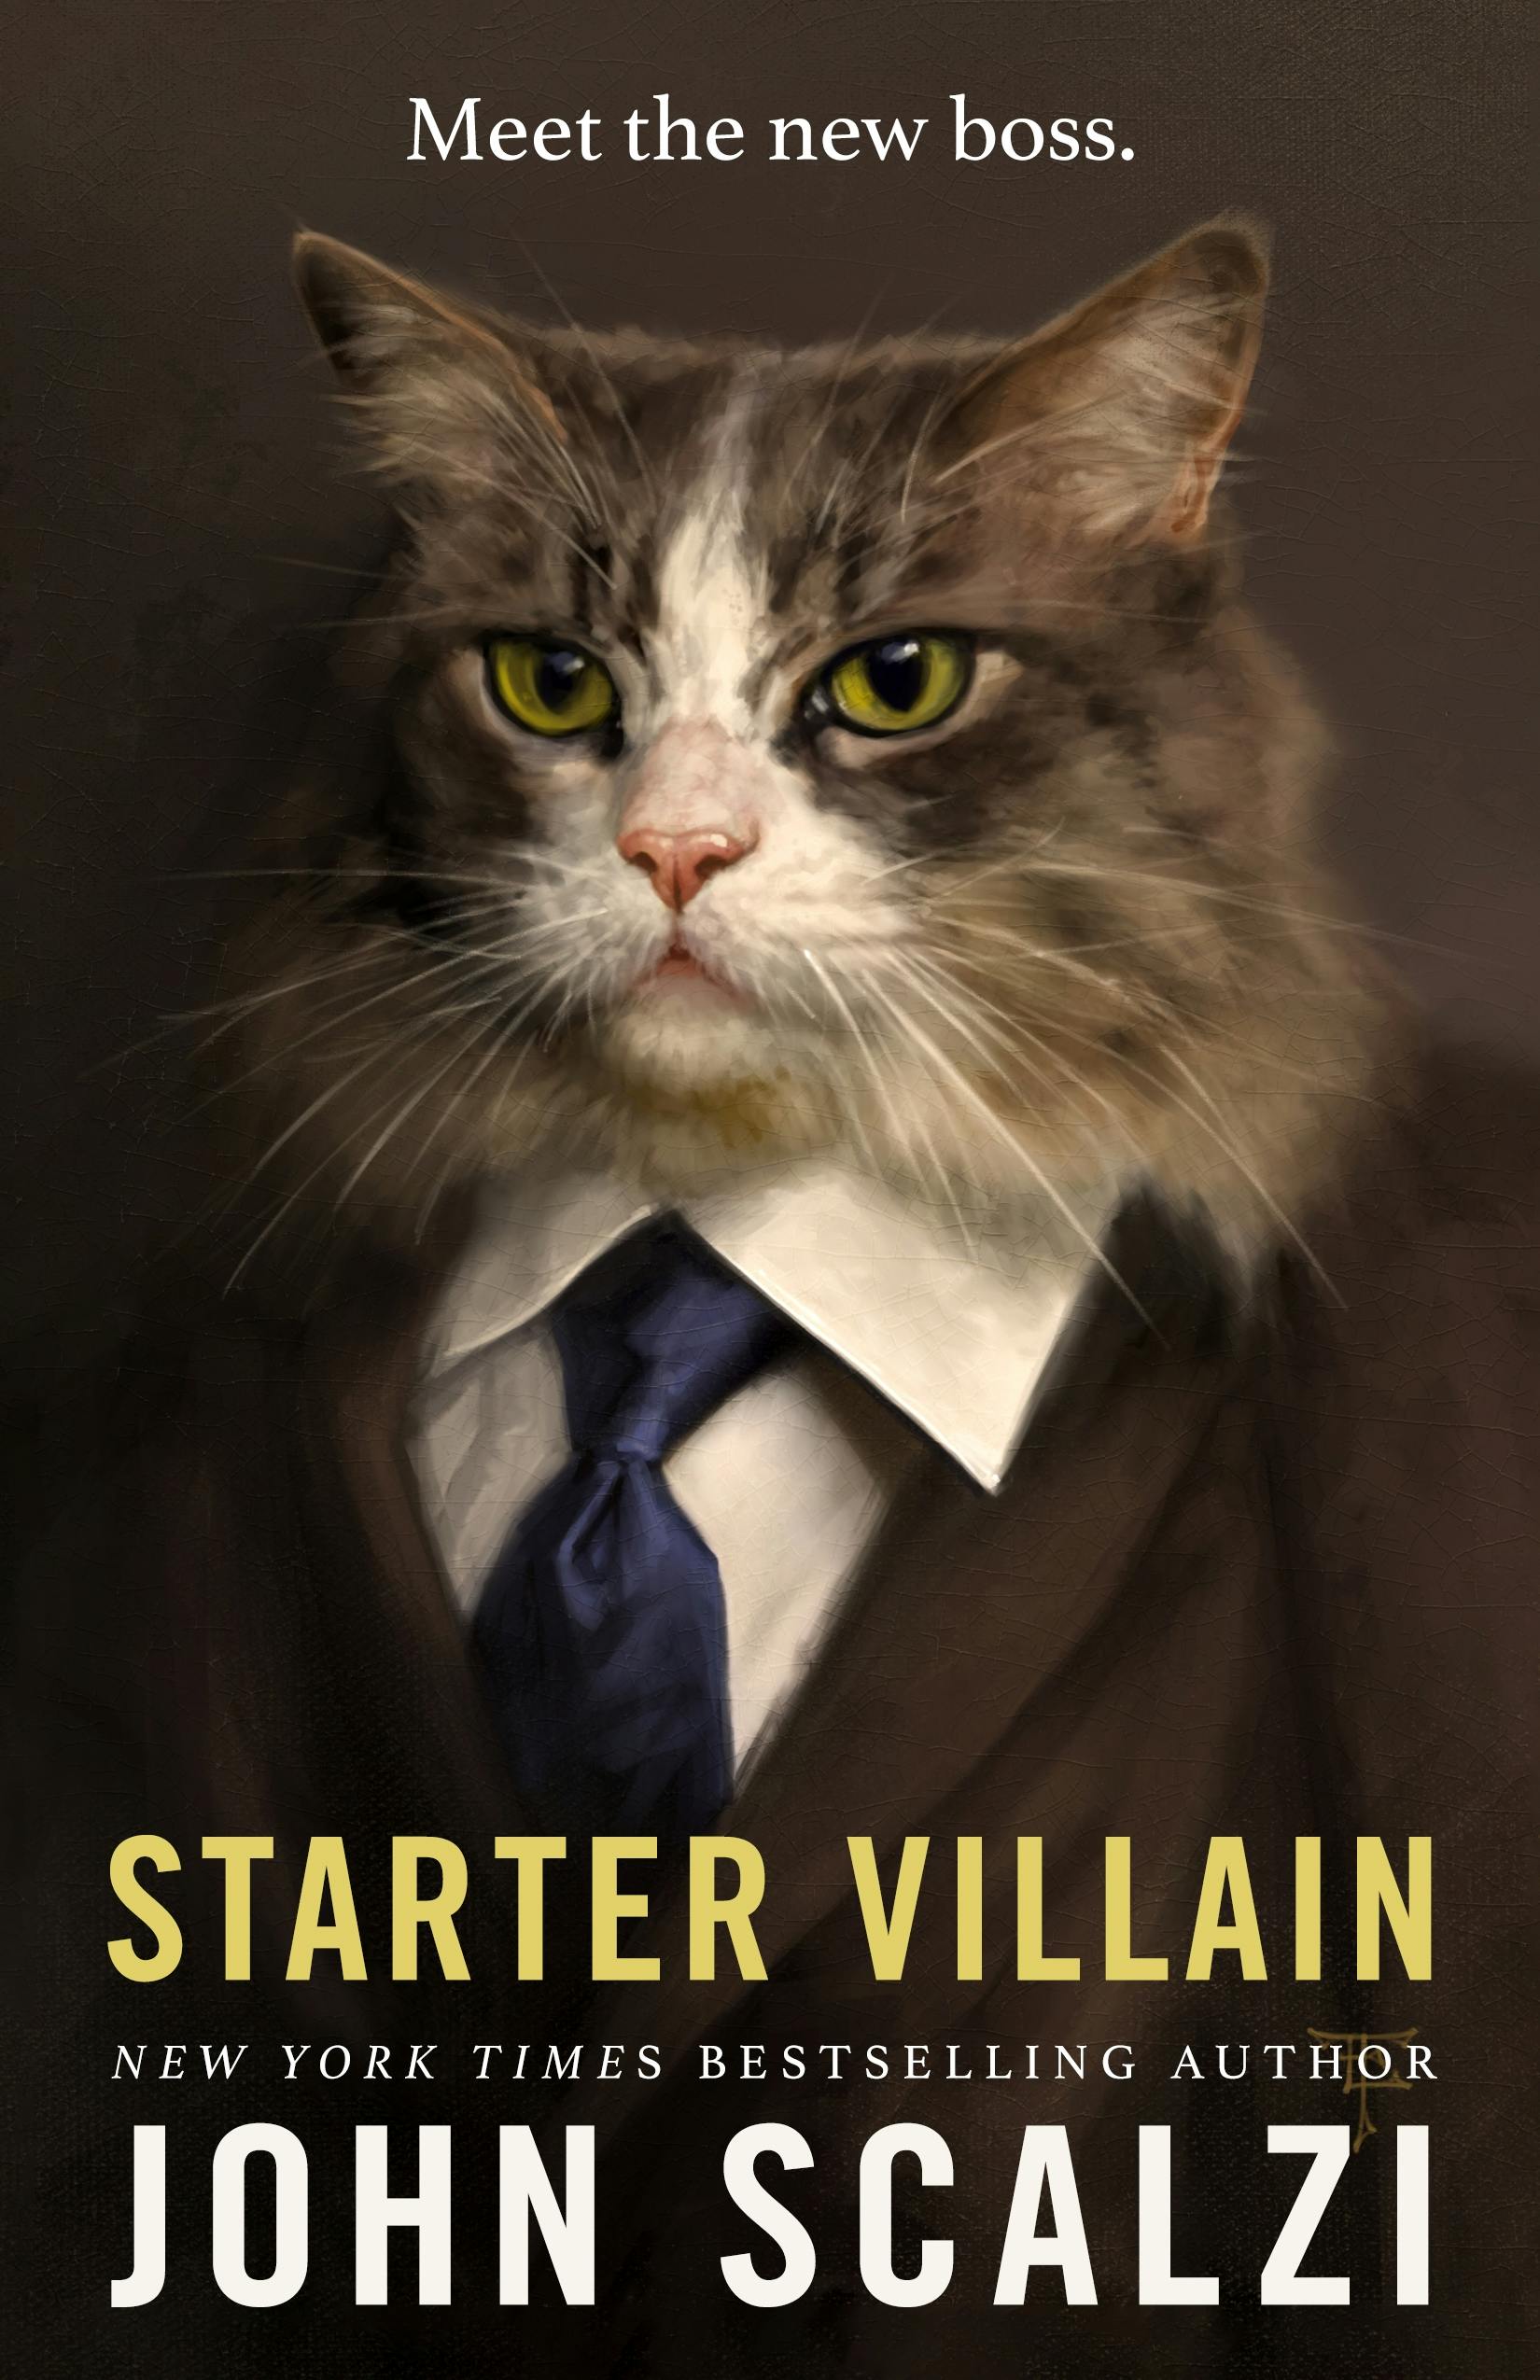 Cover for the book titled as: Starter Villain